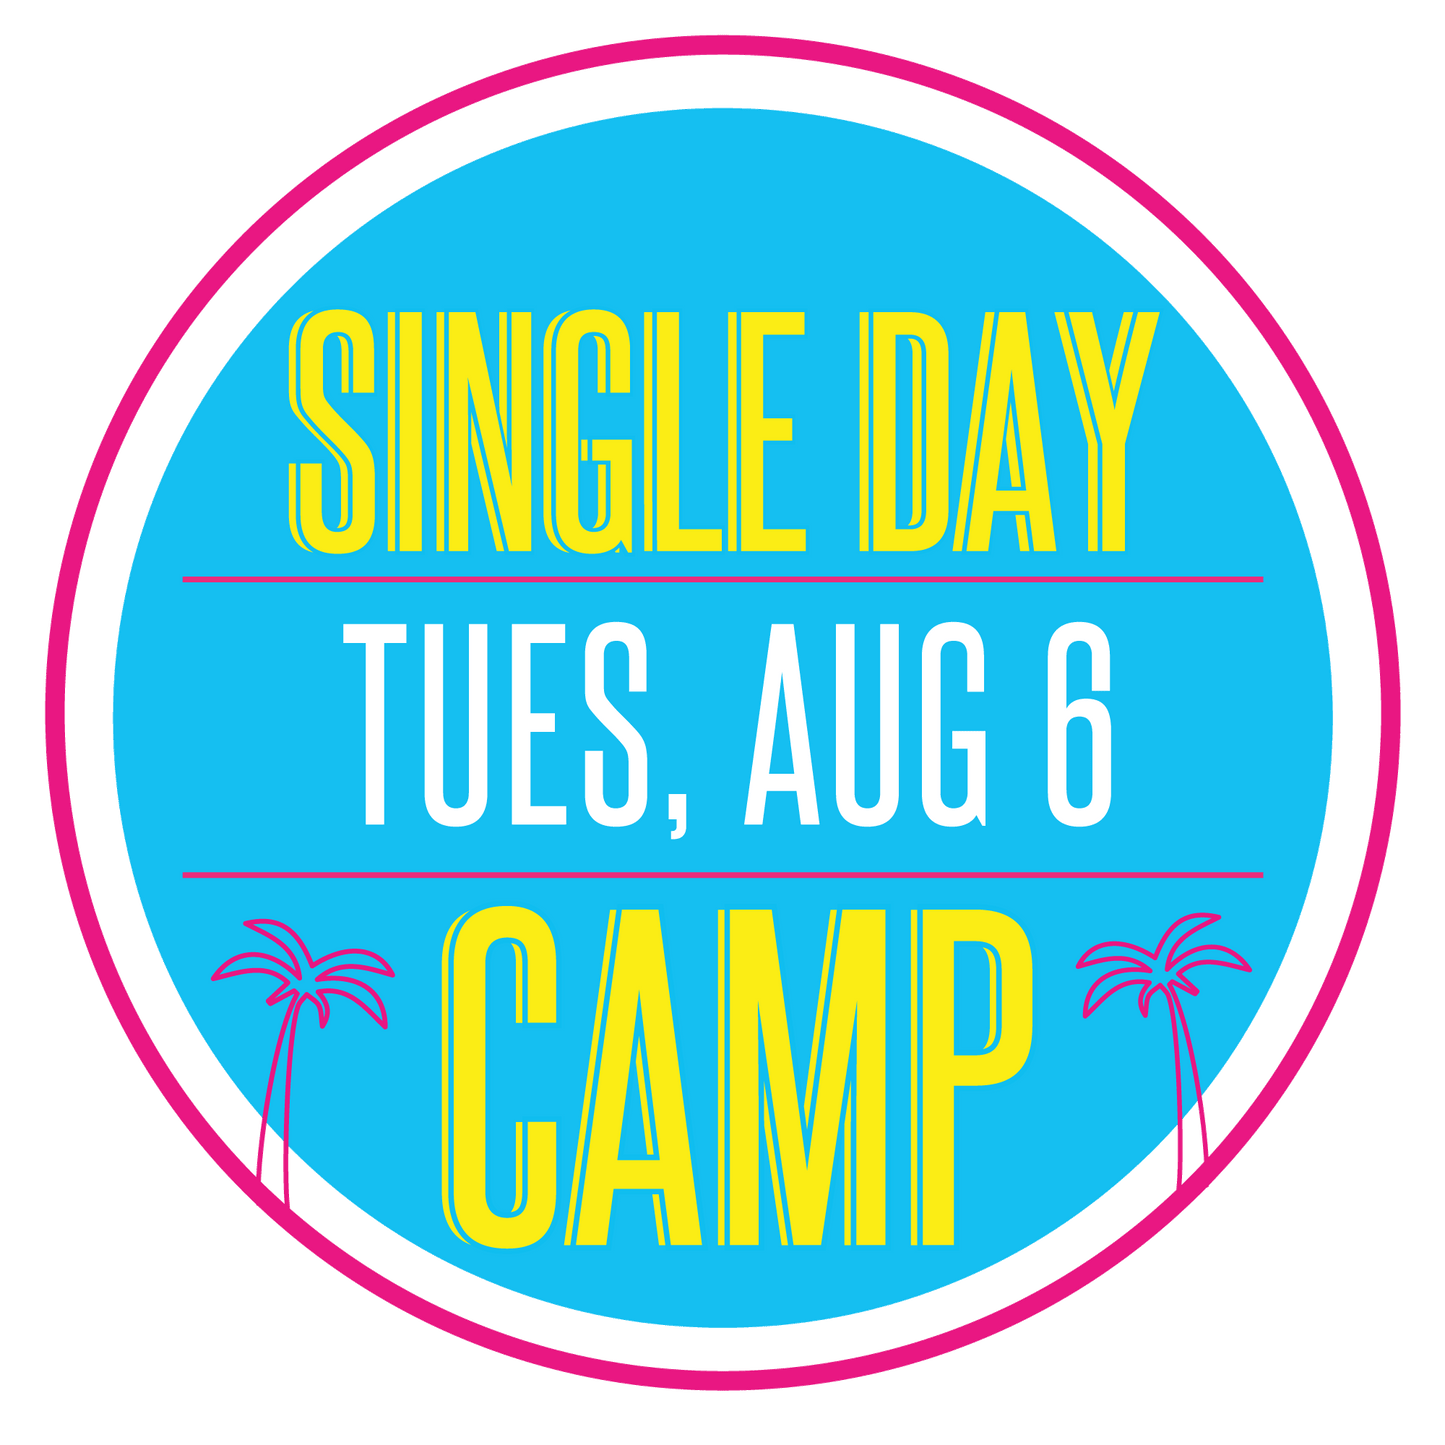 Single Day Sewing Workshop: Tuesday, August 6, 9am-3pm